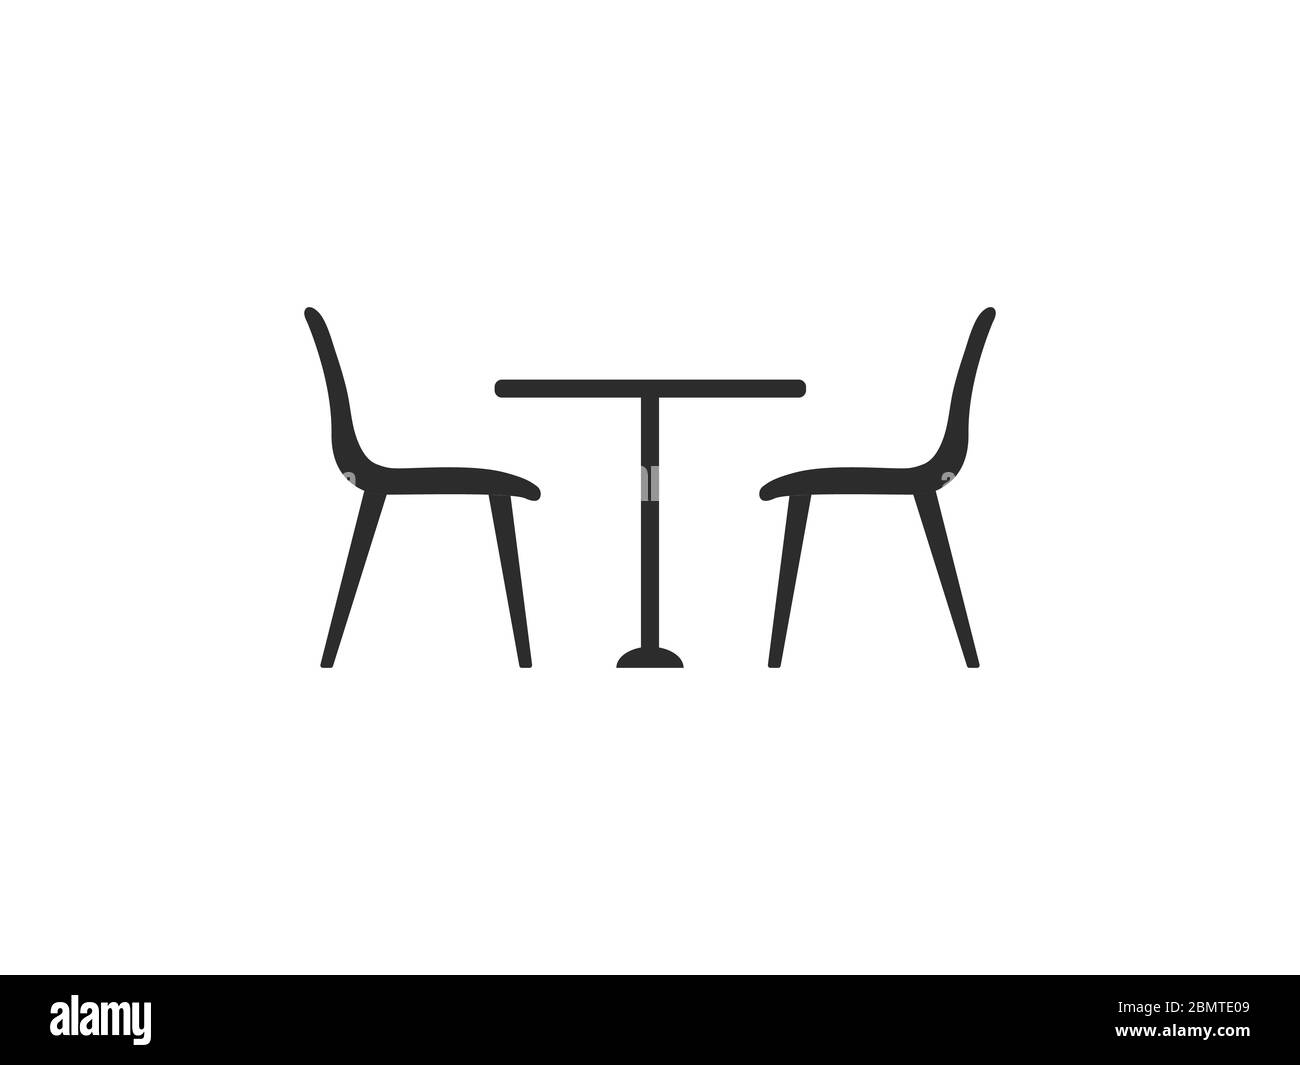 Chair, table icon. Vector illustration, flat design. Stock Vector